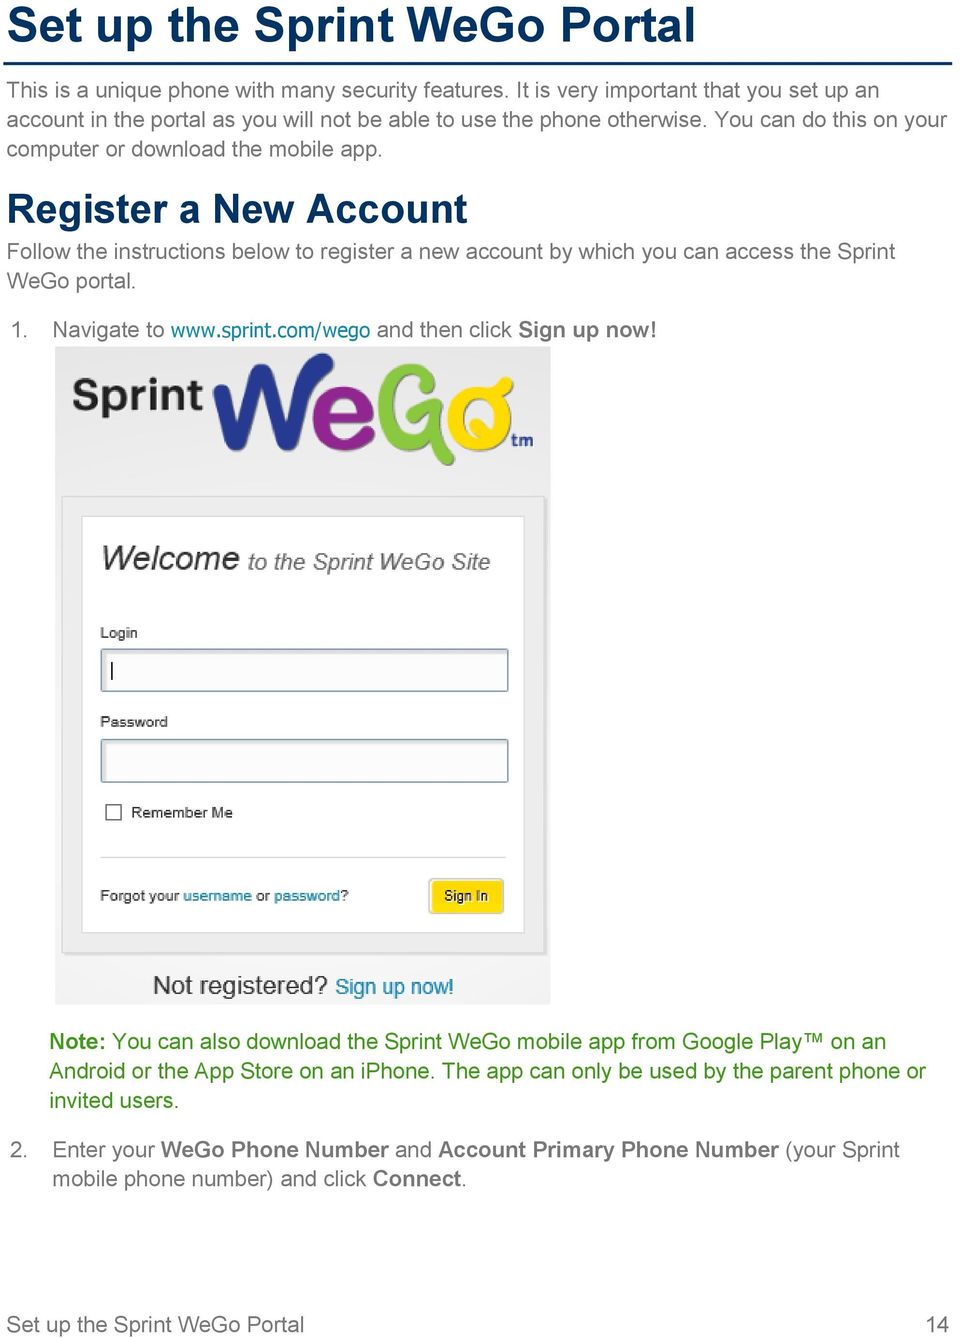 Navigate to www.sprint.com/wego and then click Sign up now! Note: You can also download the Sprint WeGo mobile app from Google Play on an Android or the App Store on an iphone.